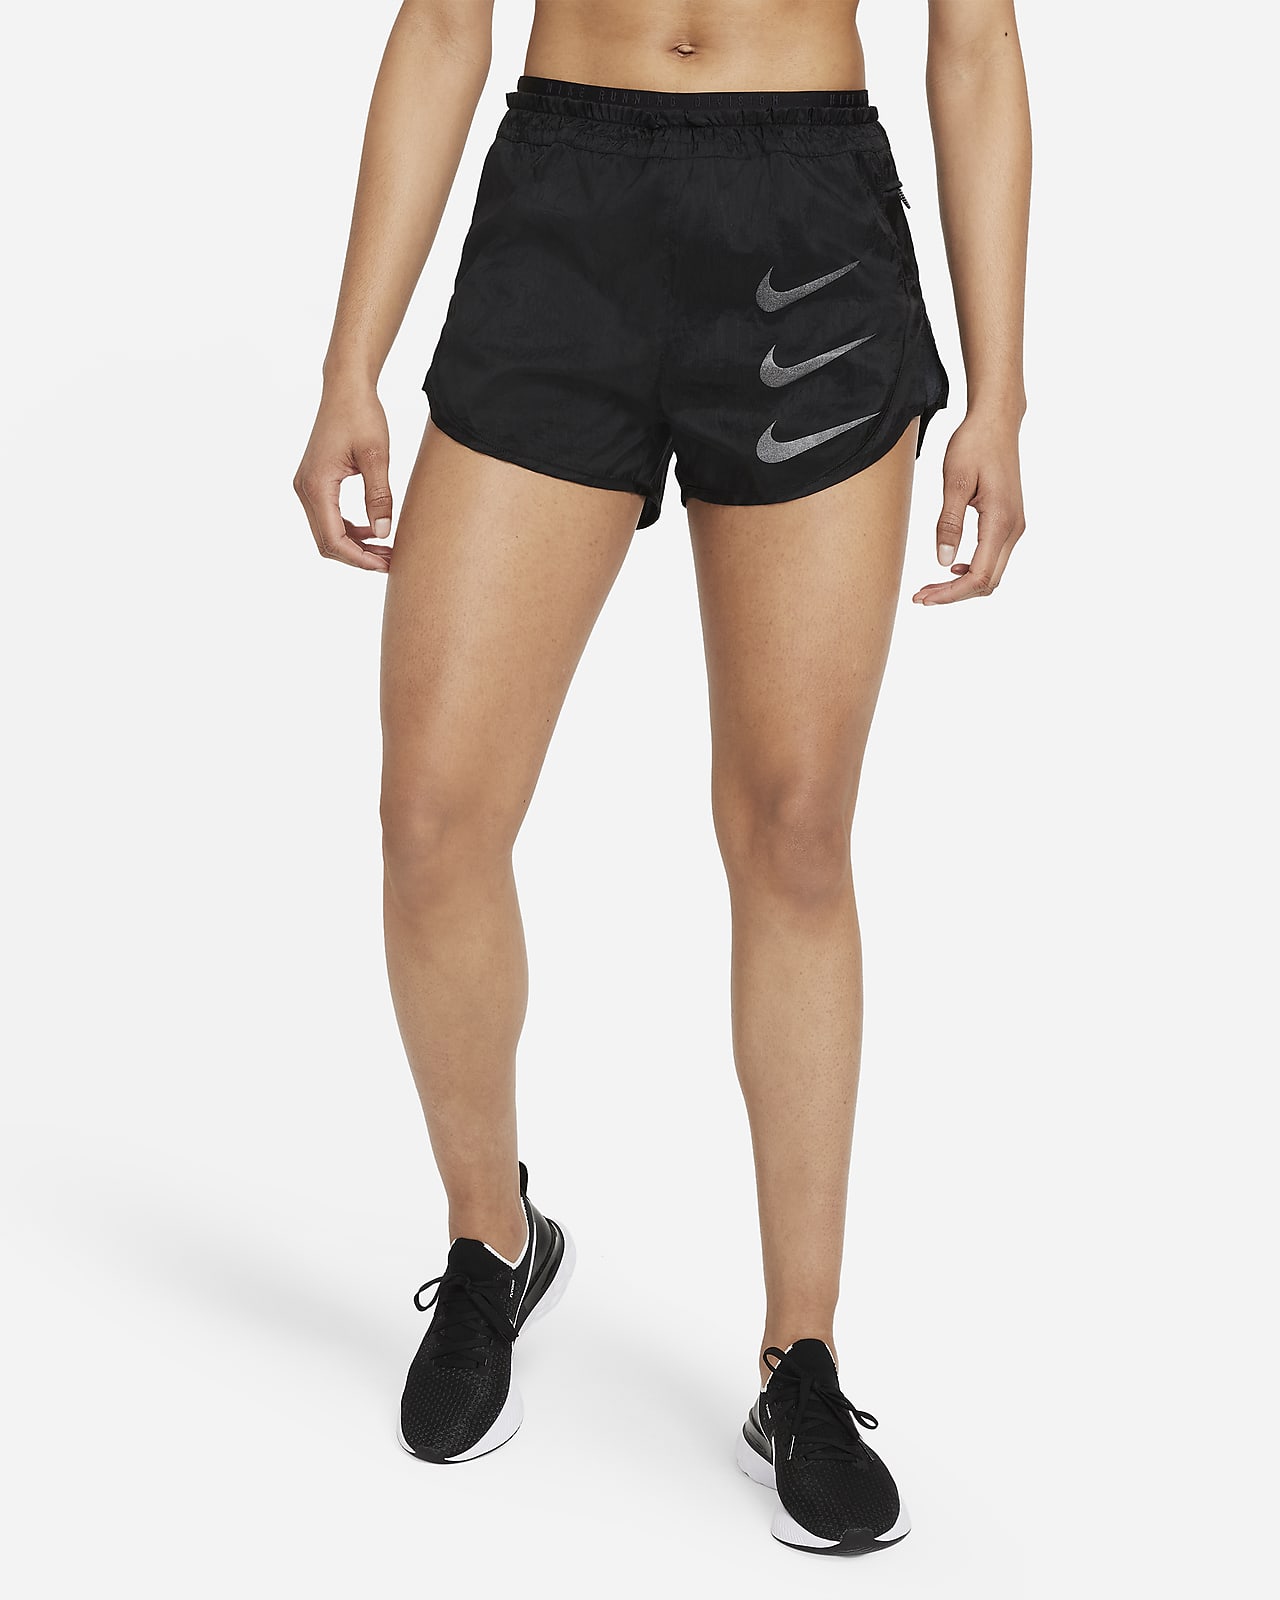 Nike Tempo Luxe Run Division Women's 2-in-1 Running Shorts. Nike NZ